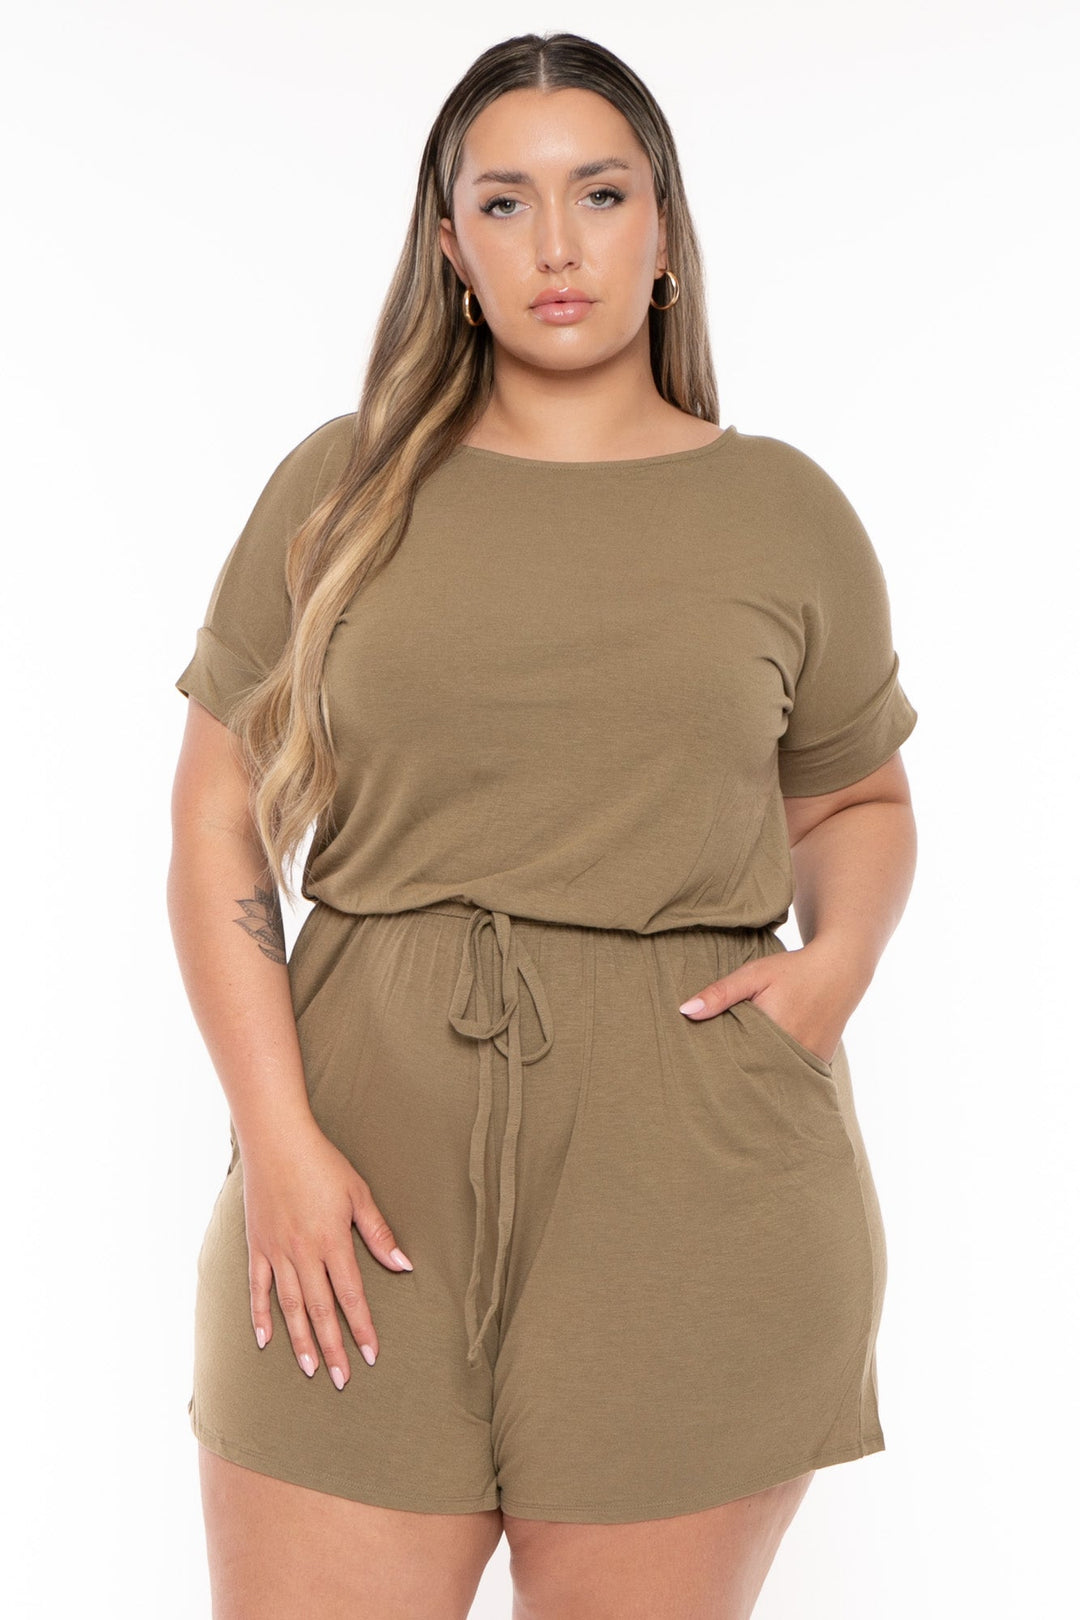 Zenana Jumpsuits and Rompers Plus Size Badey Short cuffed sleeve Romper- Khaki